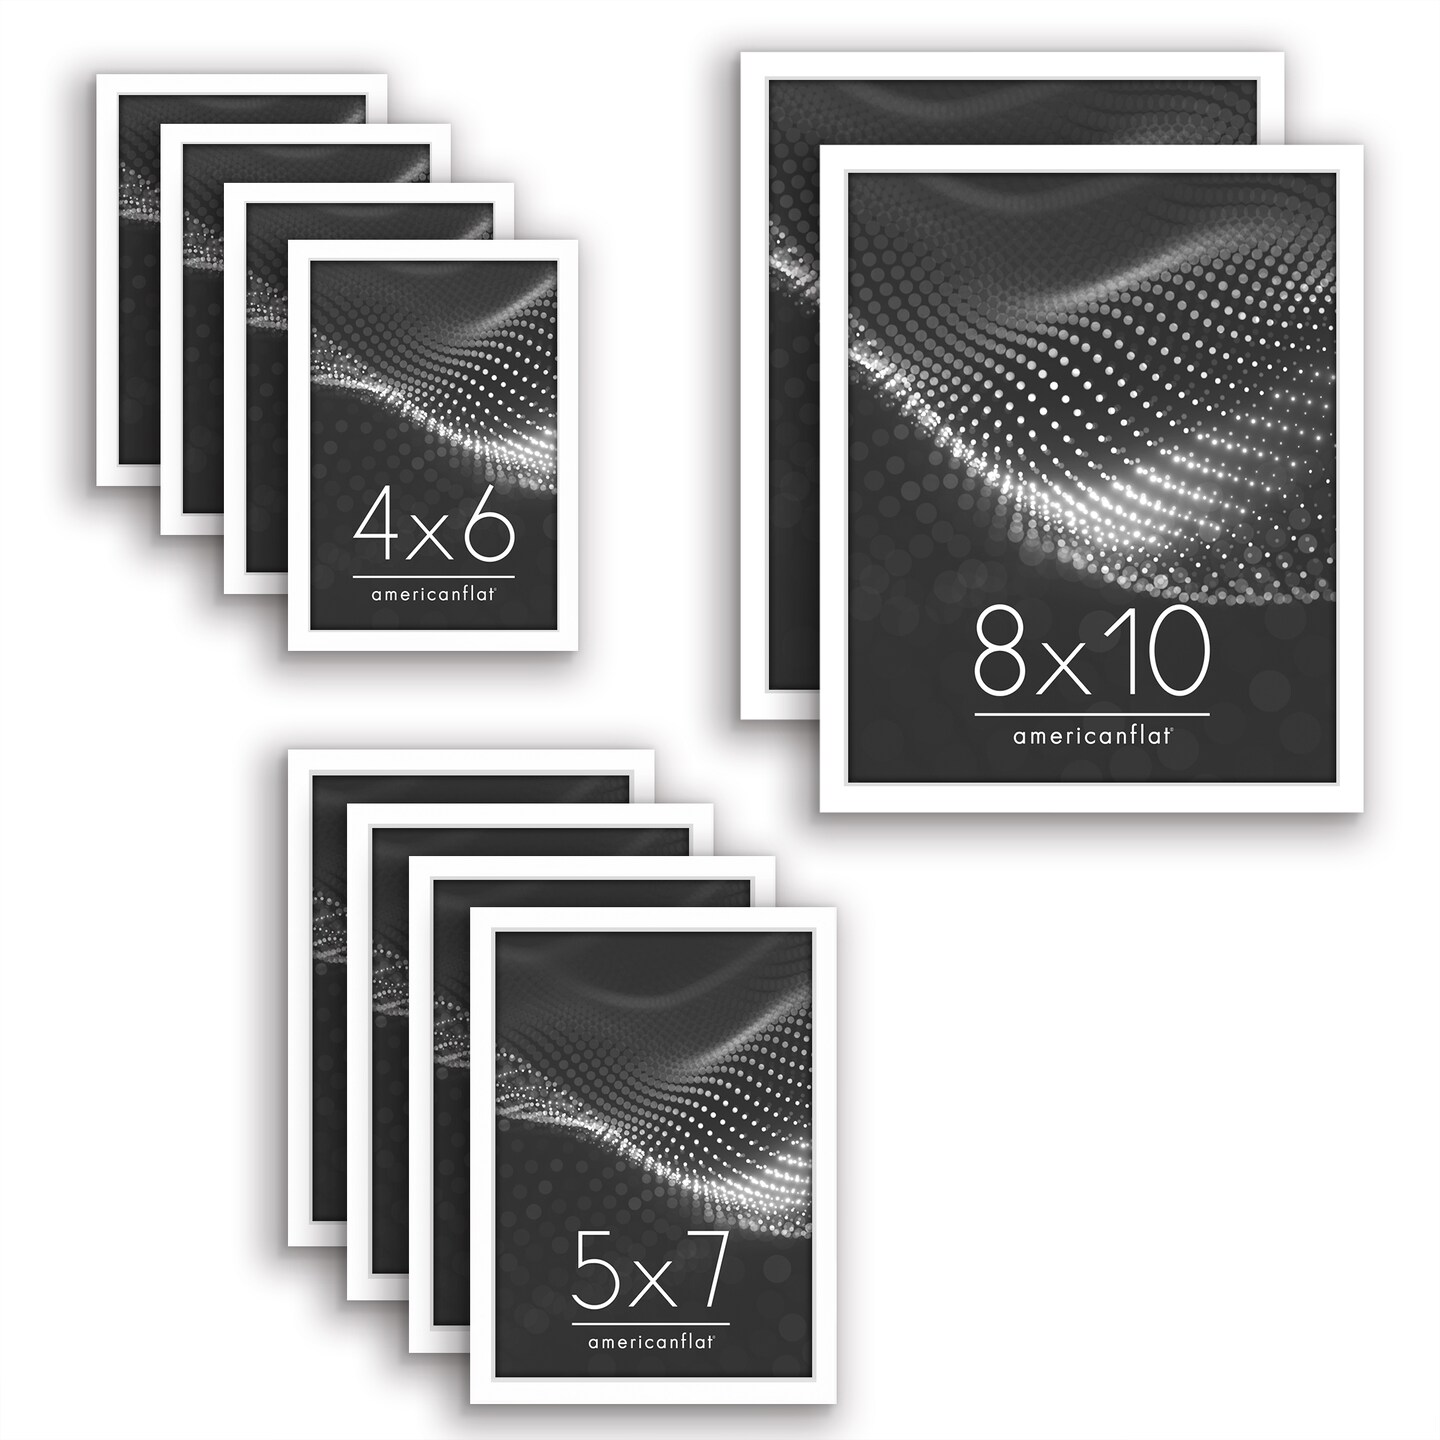 Americanflat Set of 10 Picture Frames - Gallery Wall Frame Set with Two 8x10, Four 5x7, and Four 4x6 Frames